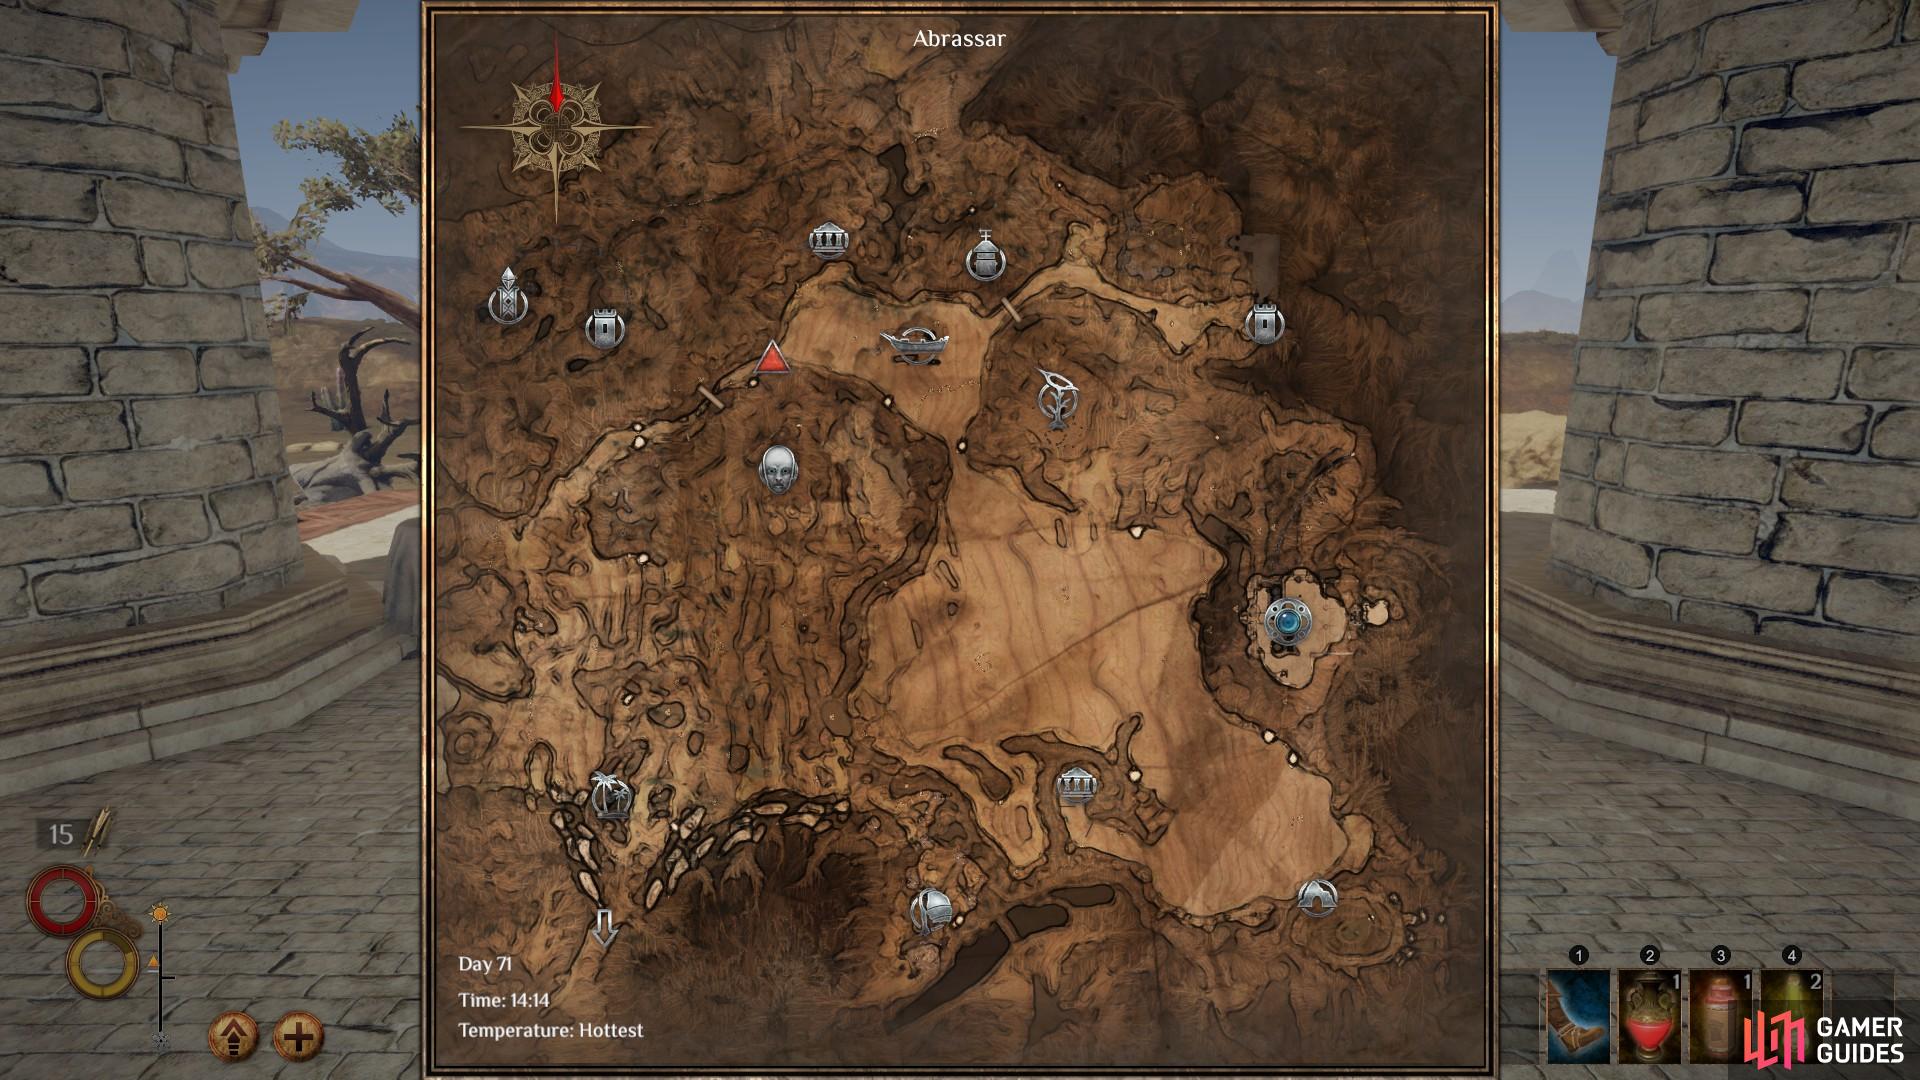 The location of the canyon entrance on the Abrassar map, where you will find Crescent Sharks.